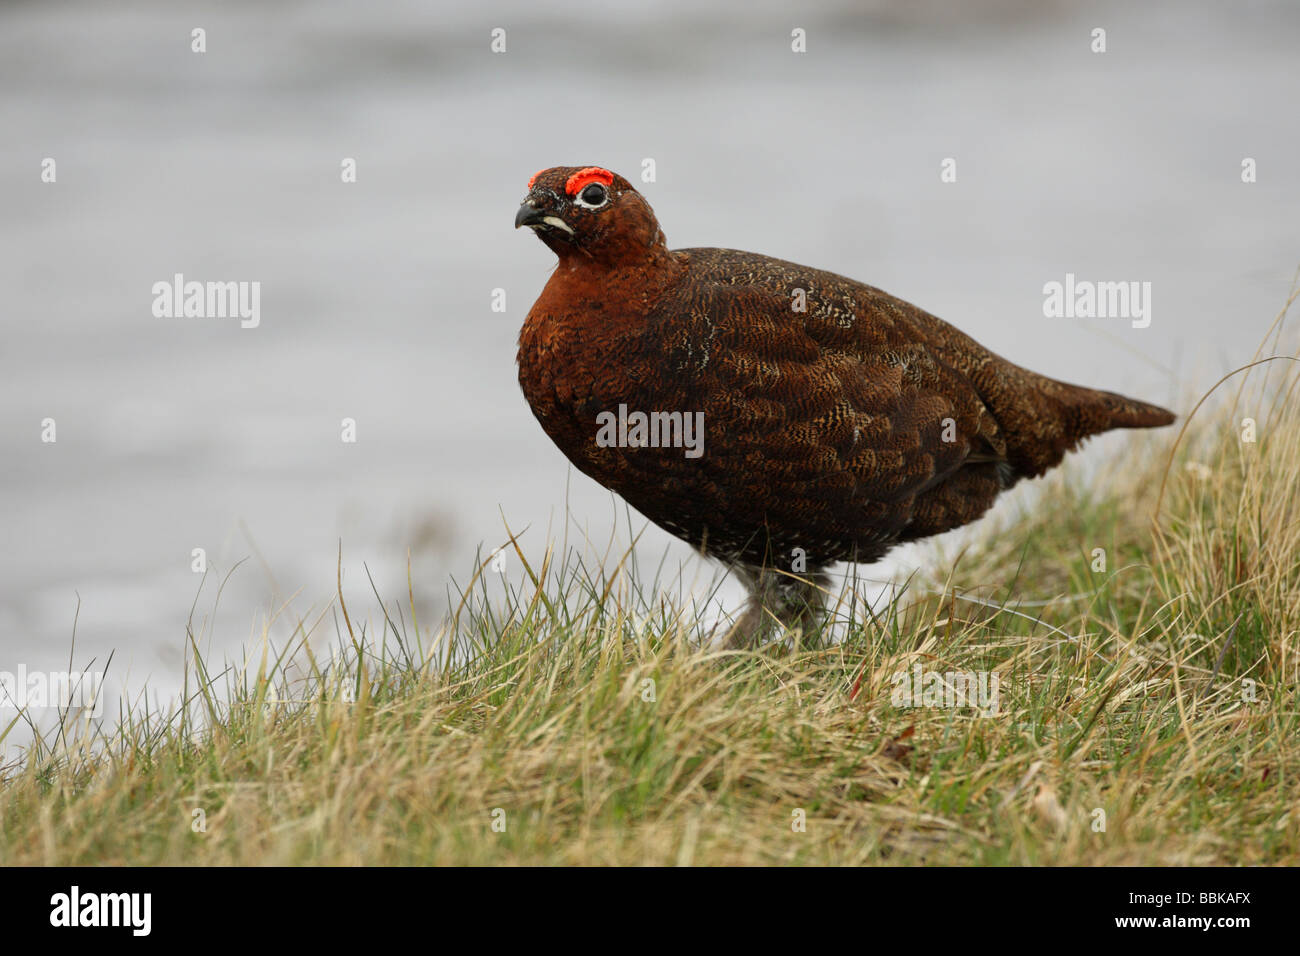 Red Grouse lagopus lagopus scoticus walking in the grass by the side of a loch Stock Photo